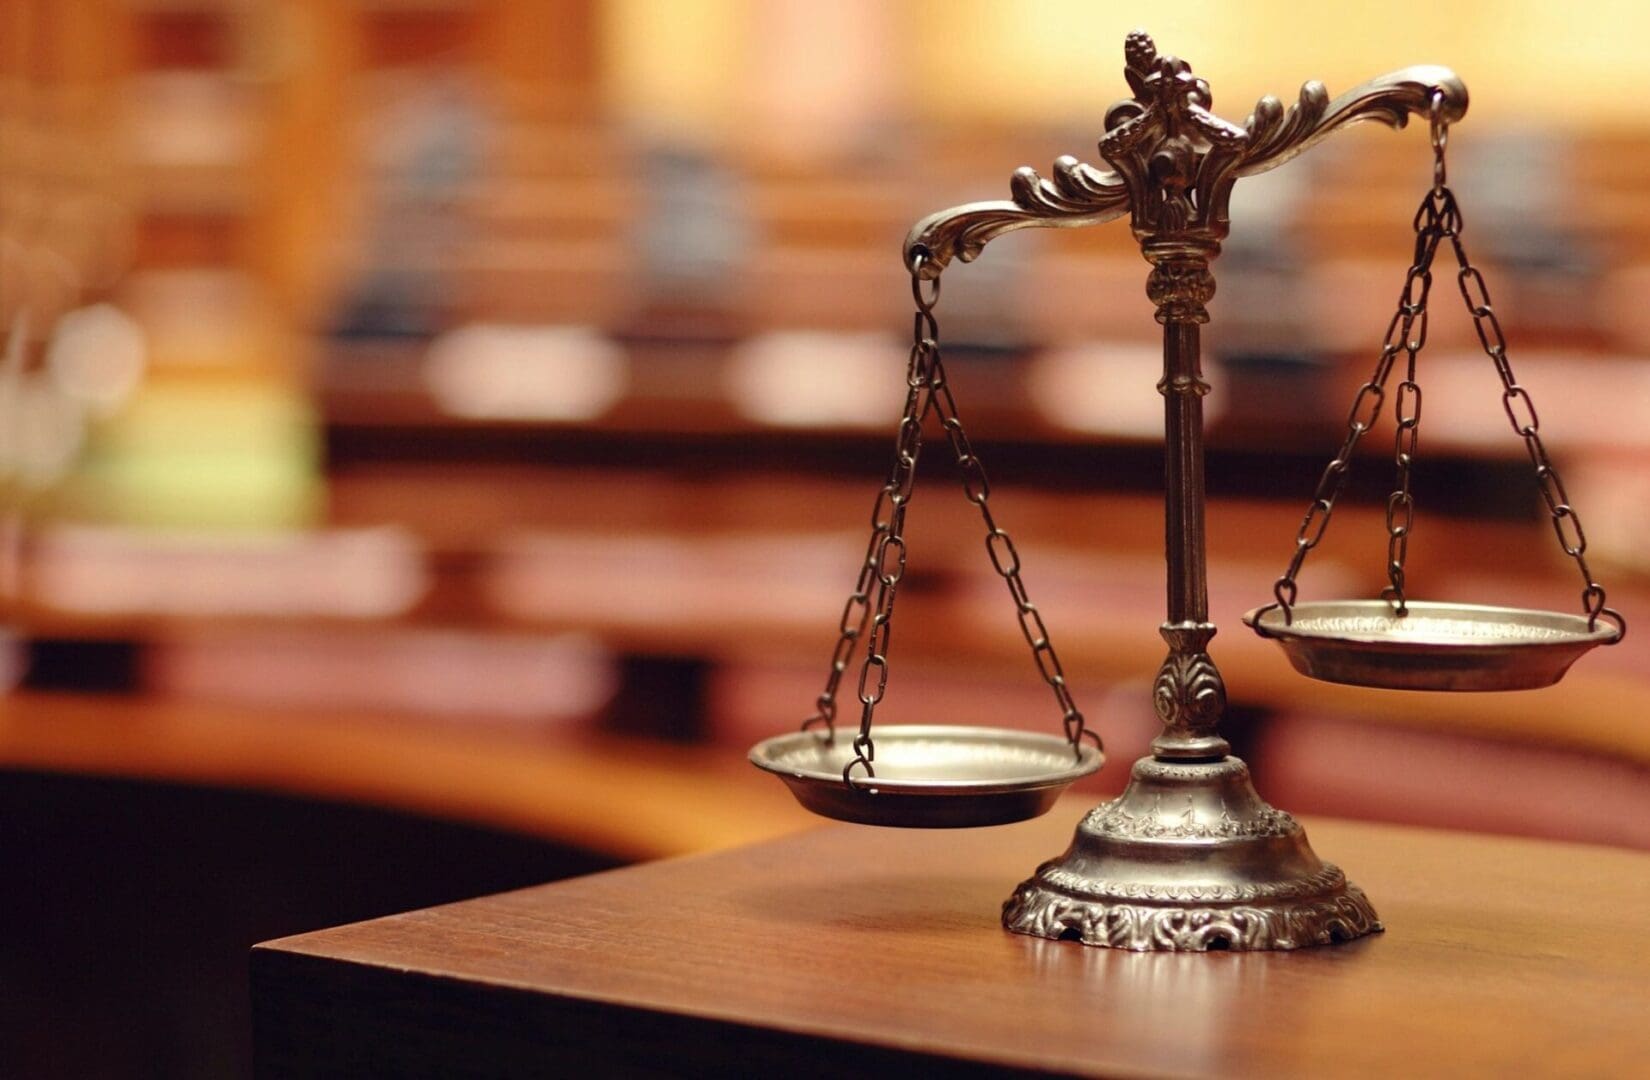 Close up image of a Court scales on a table